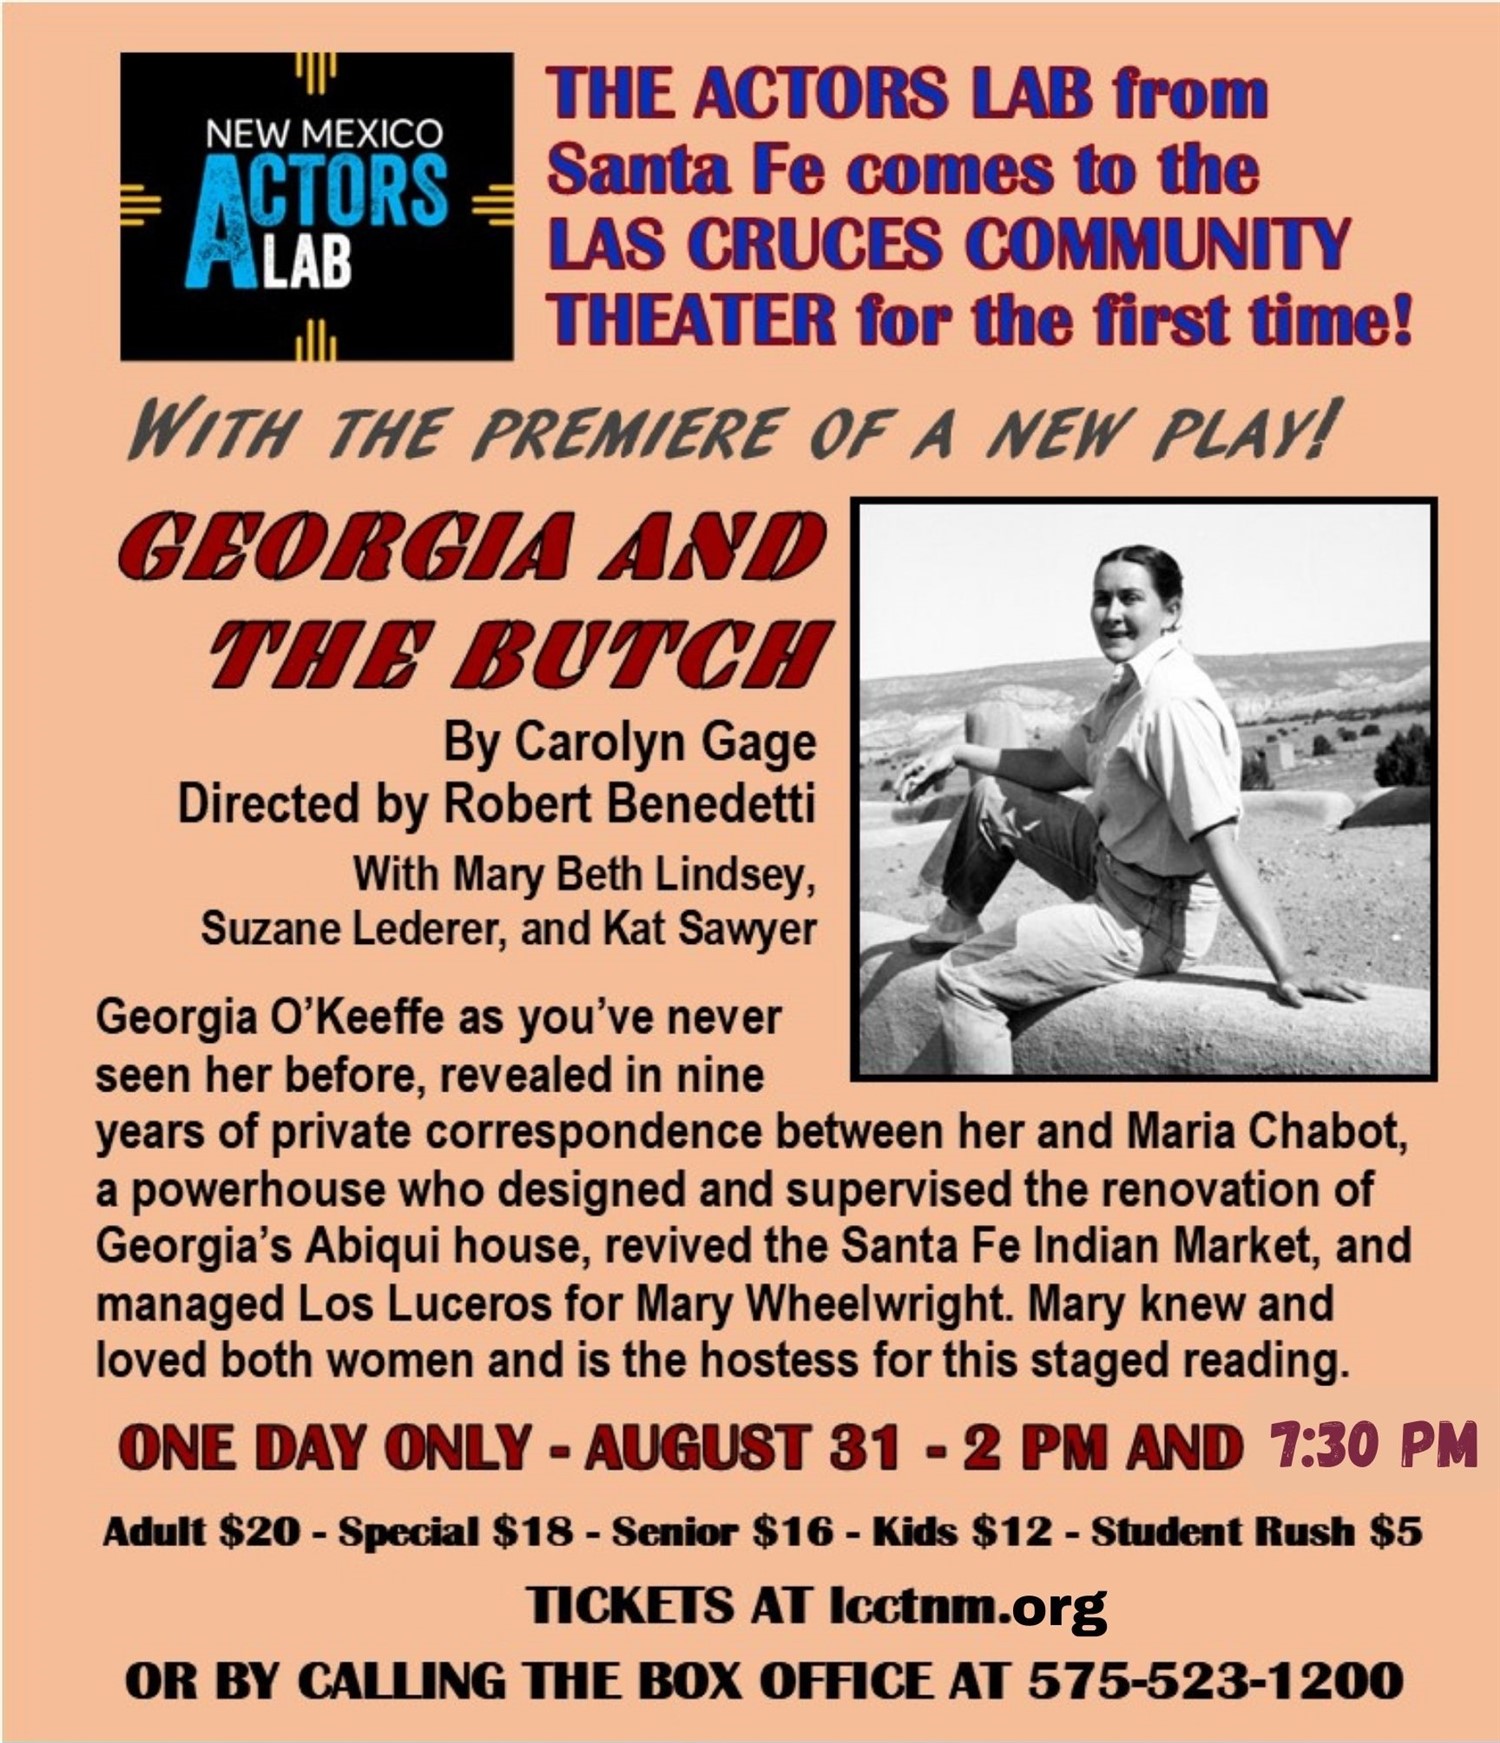 Georgia and the Butch  on Sep 02, 00:00@LCCT-3.0 - Pick a seat, Buy tickets and Get information on Las Cruces Community Theatre lcct